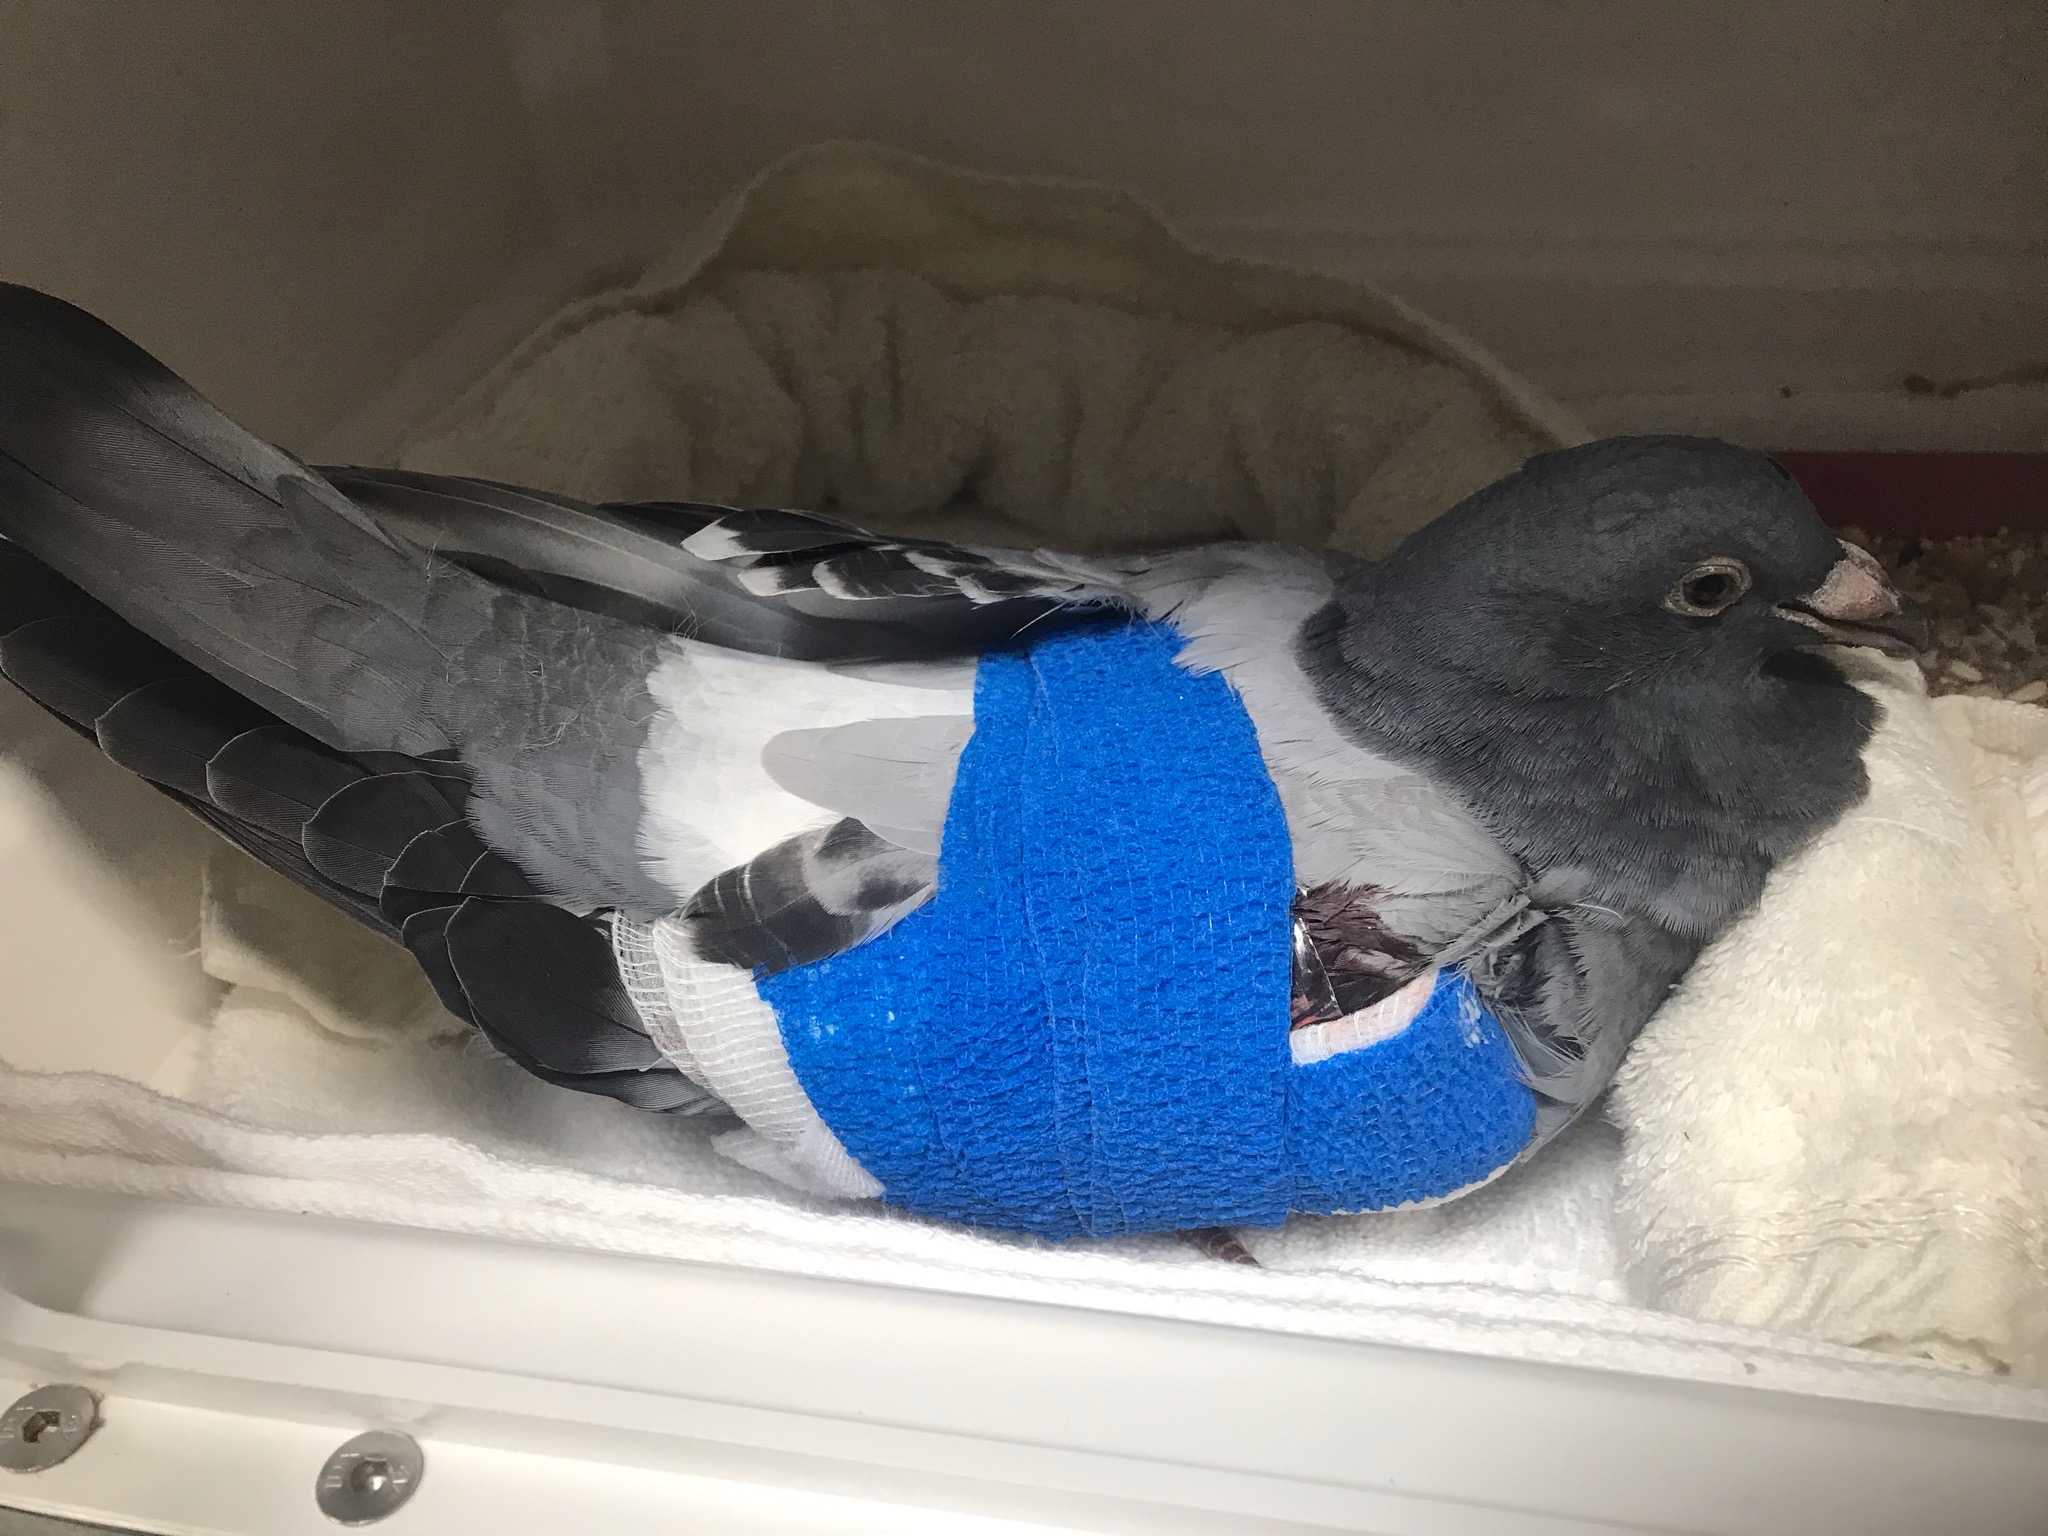 Injured racing pigeon with wing wrap in hospital tank